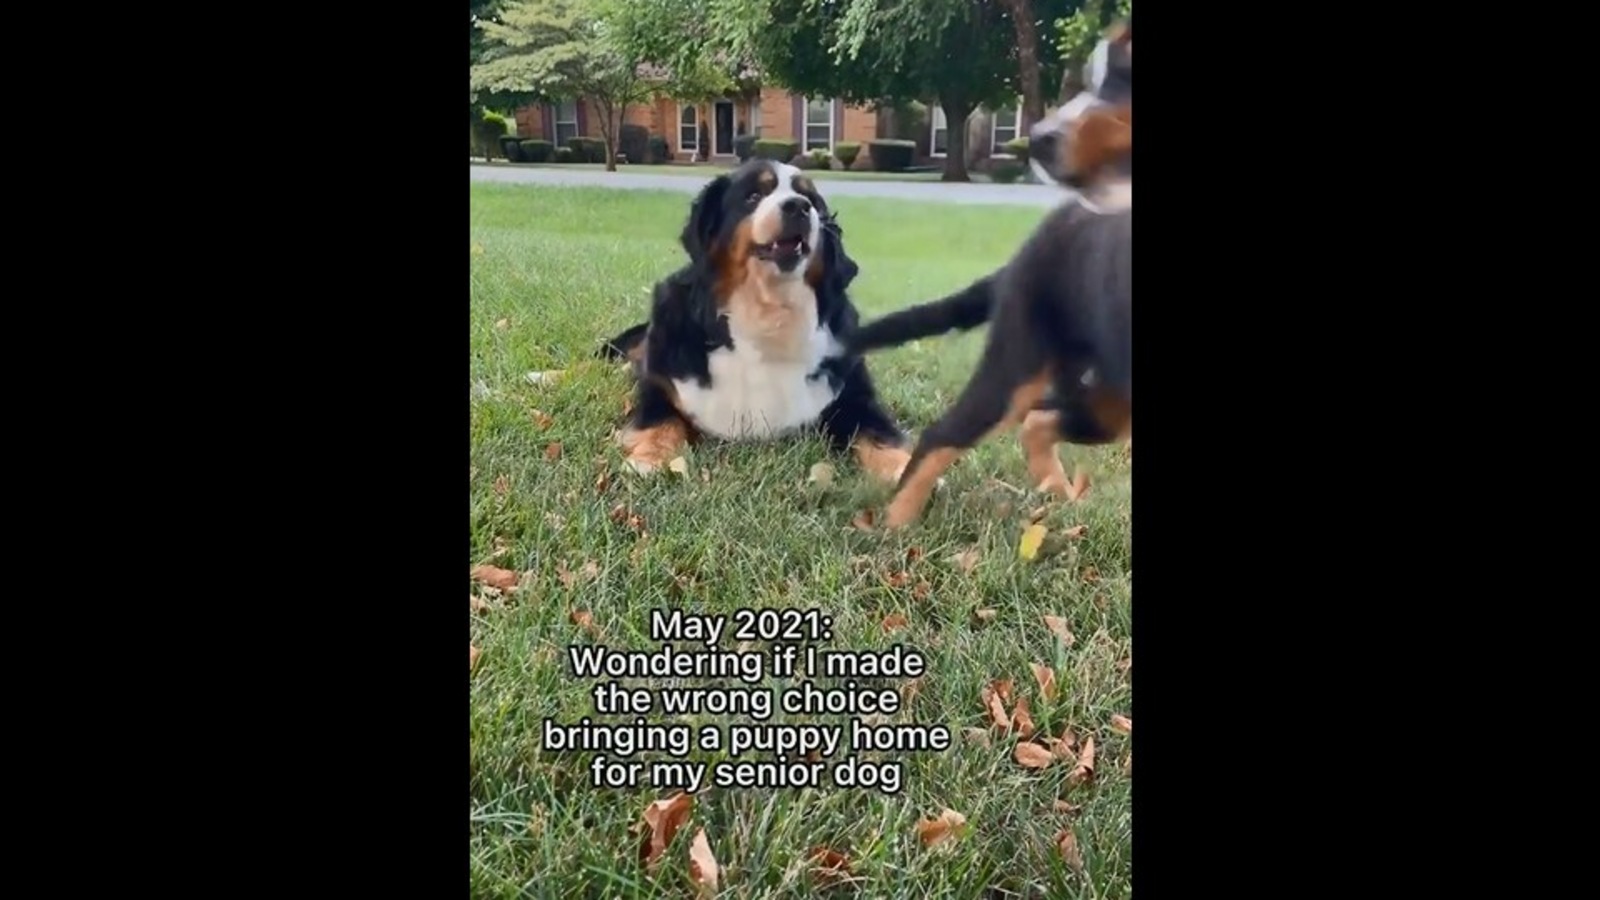 The 20 Funniest Dog Videos of 2021